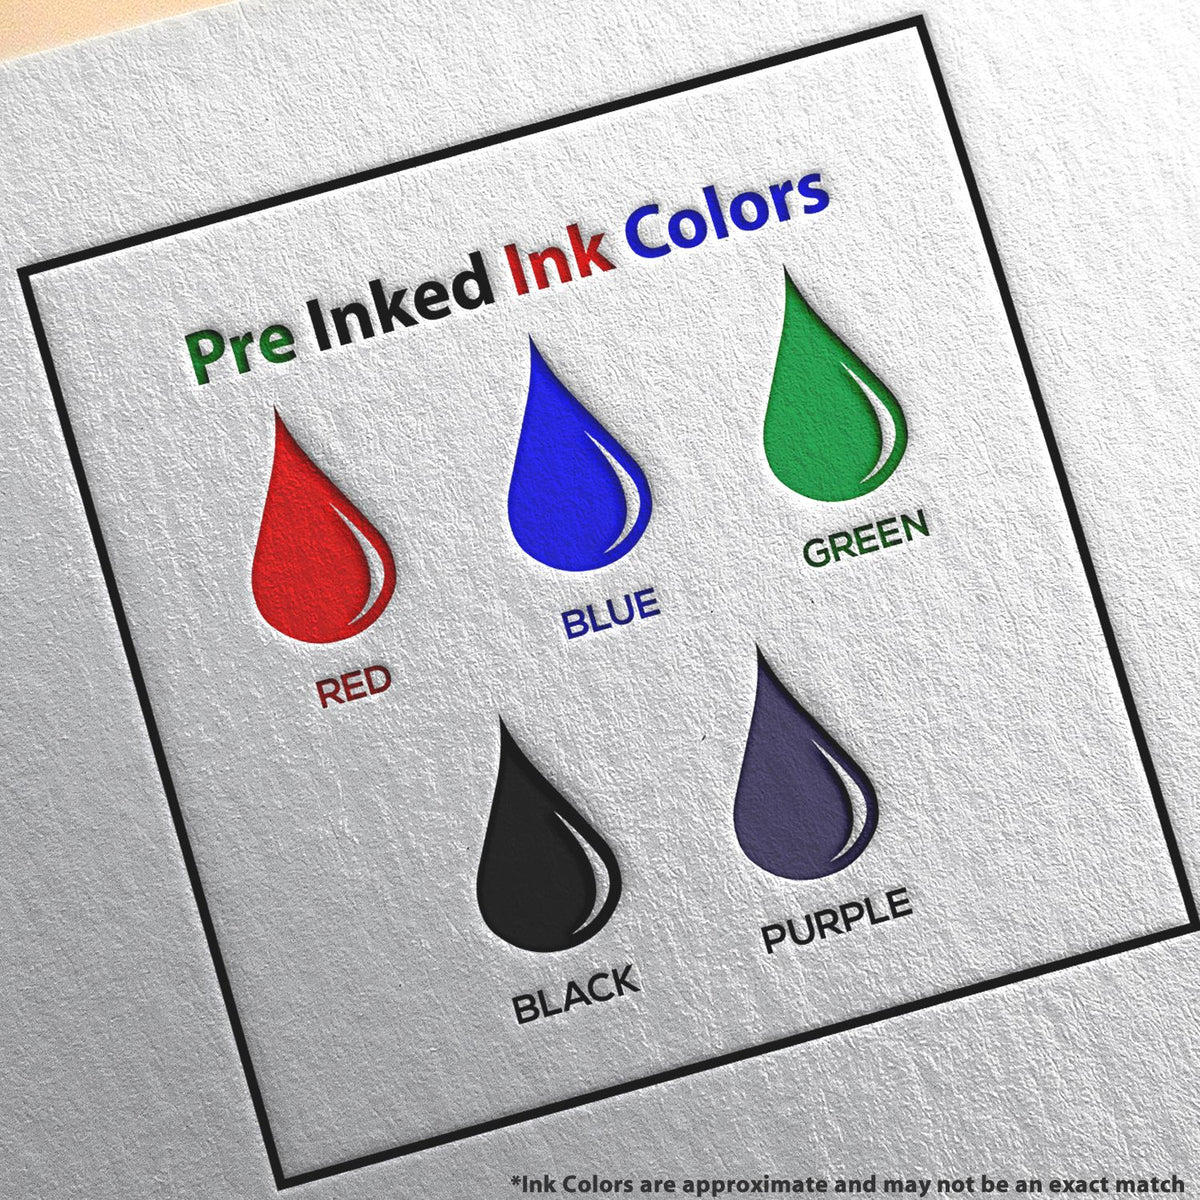 A picture showing the different ink colors or hues available for the Premium MaxLight Pre-Inked Kentucky Landscape Architectural Stamp product.